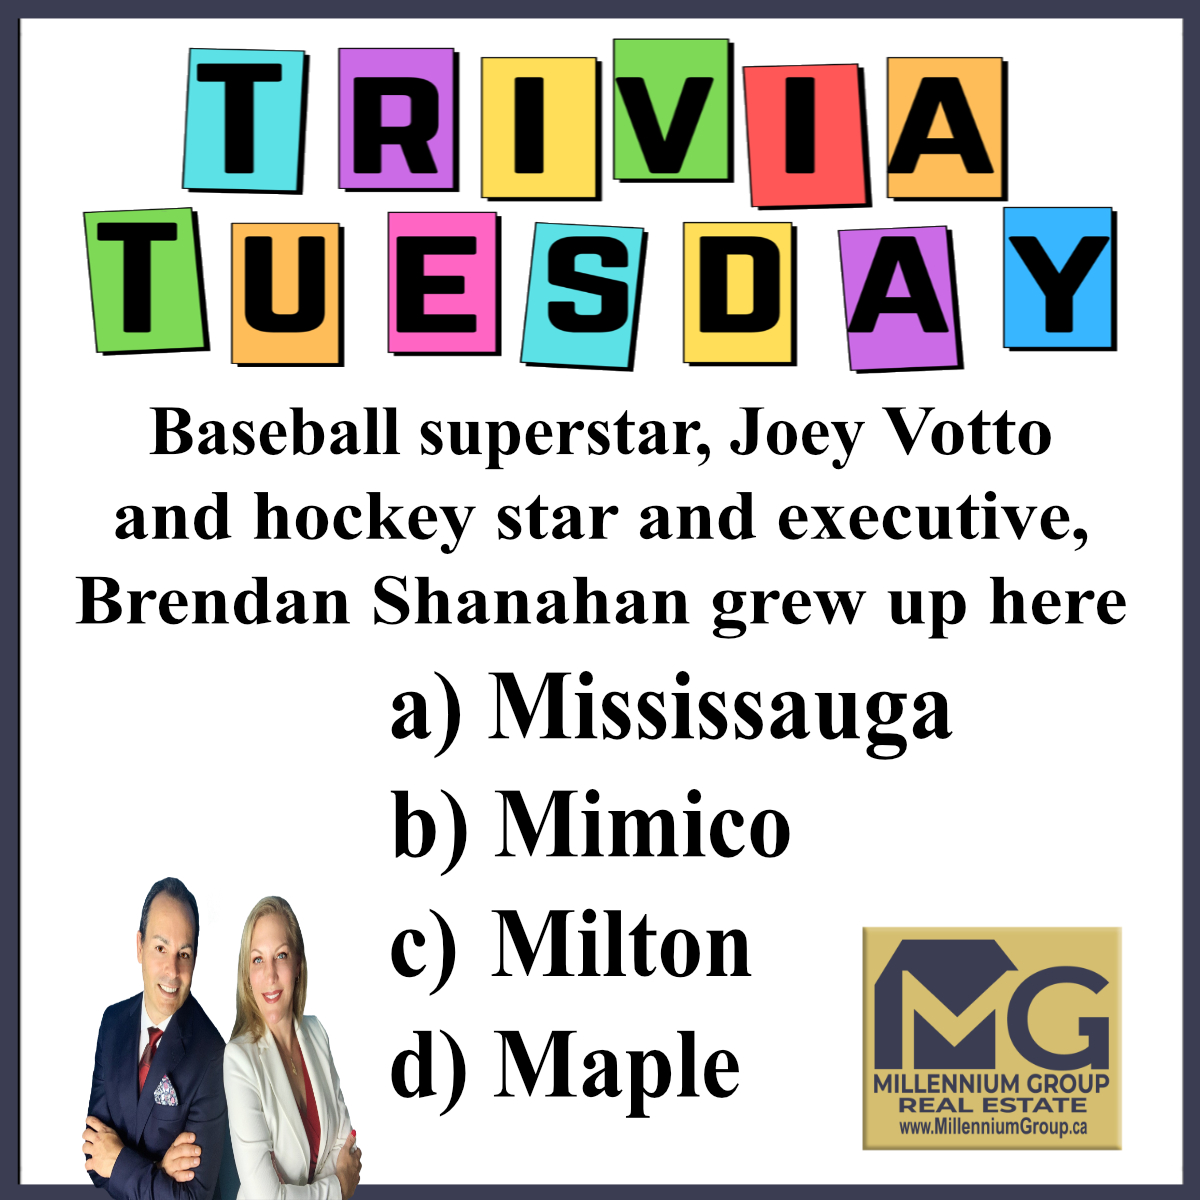 This area is also home to a championship lacrosse team that in existence since 1890! 🥍

#NeighbourhoodTrivia #OntarioTrivia #SportsTrivia #TriviaTuesday #TuesdayTrivia #KendraCutroneBroker #TonyCutroneRealtor #MillenniumGroupRealEstate #FREEHomeEvaluation #FREEHomeStaging